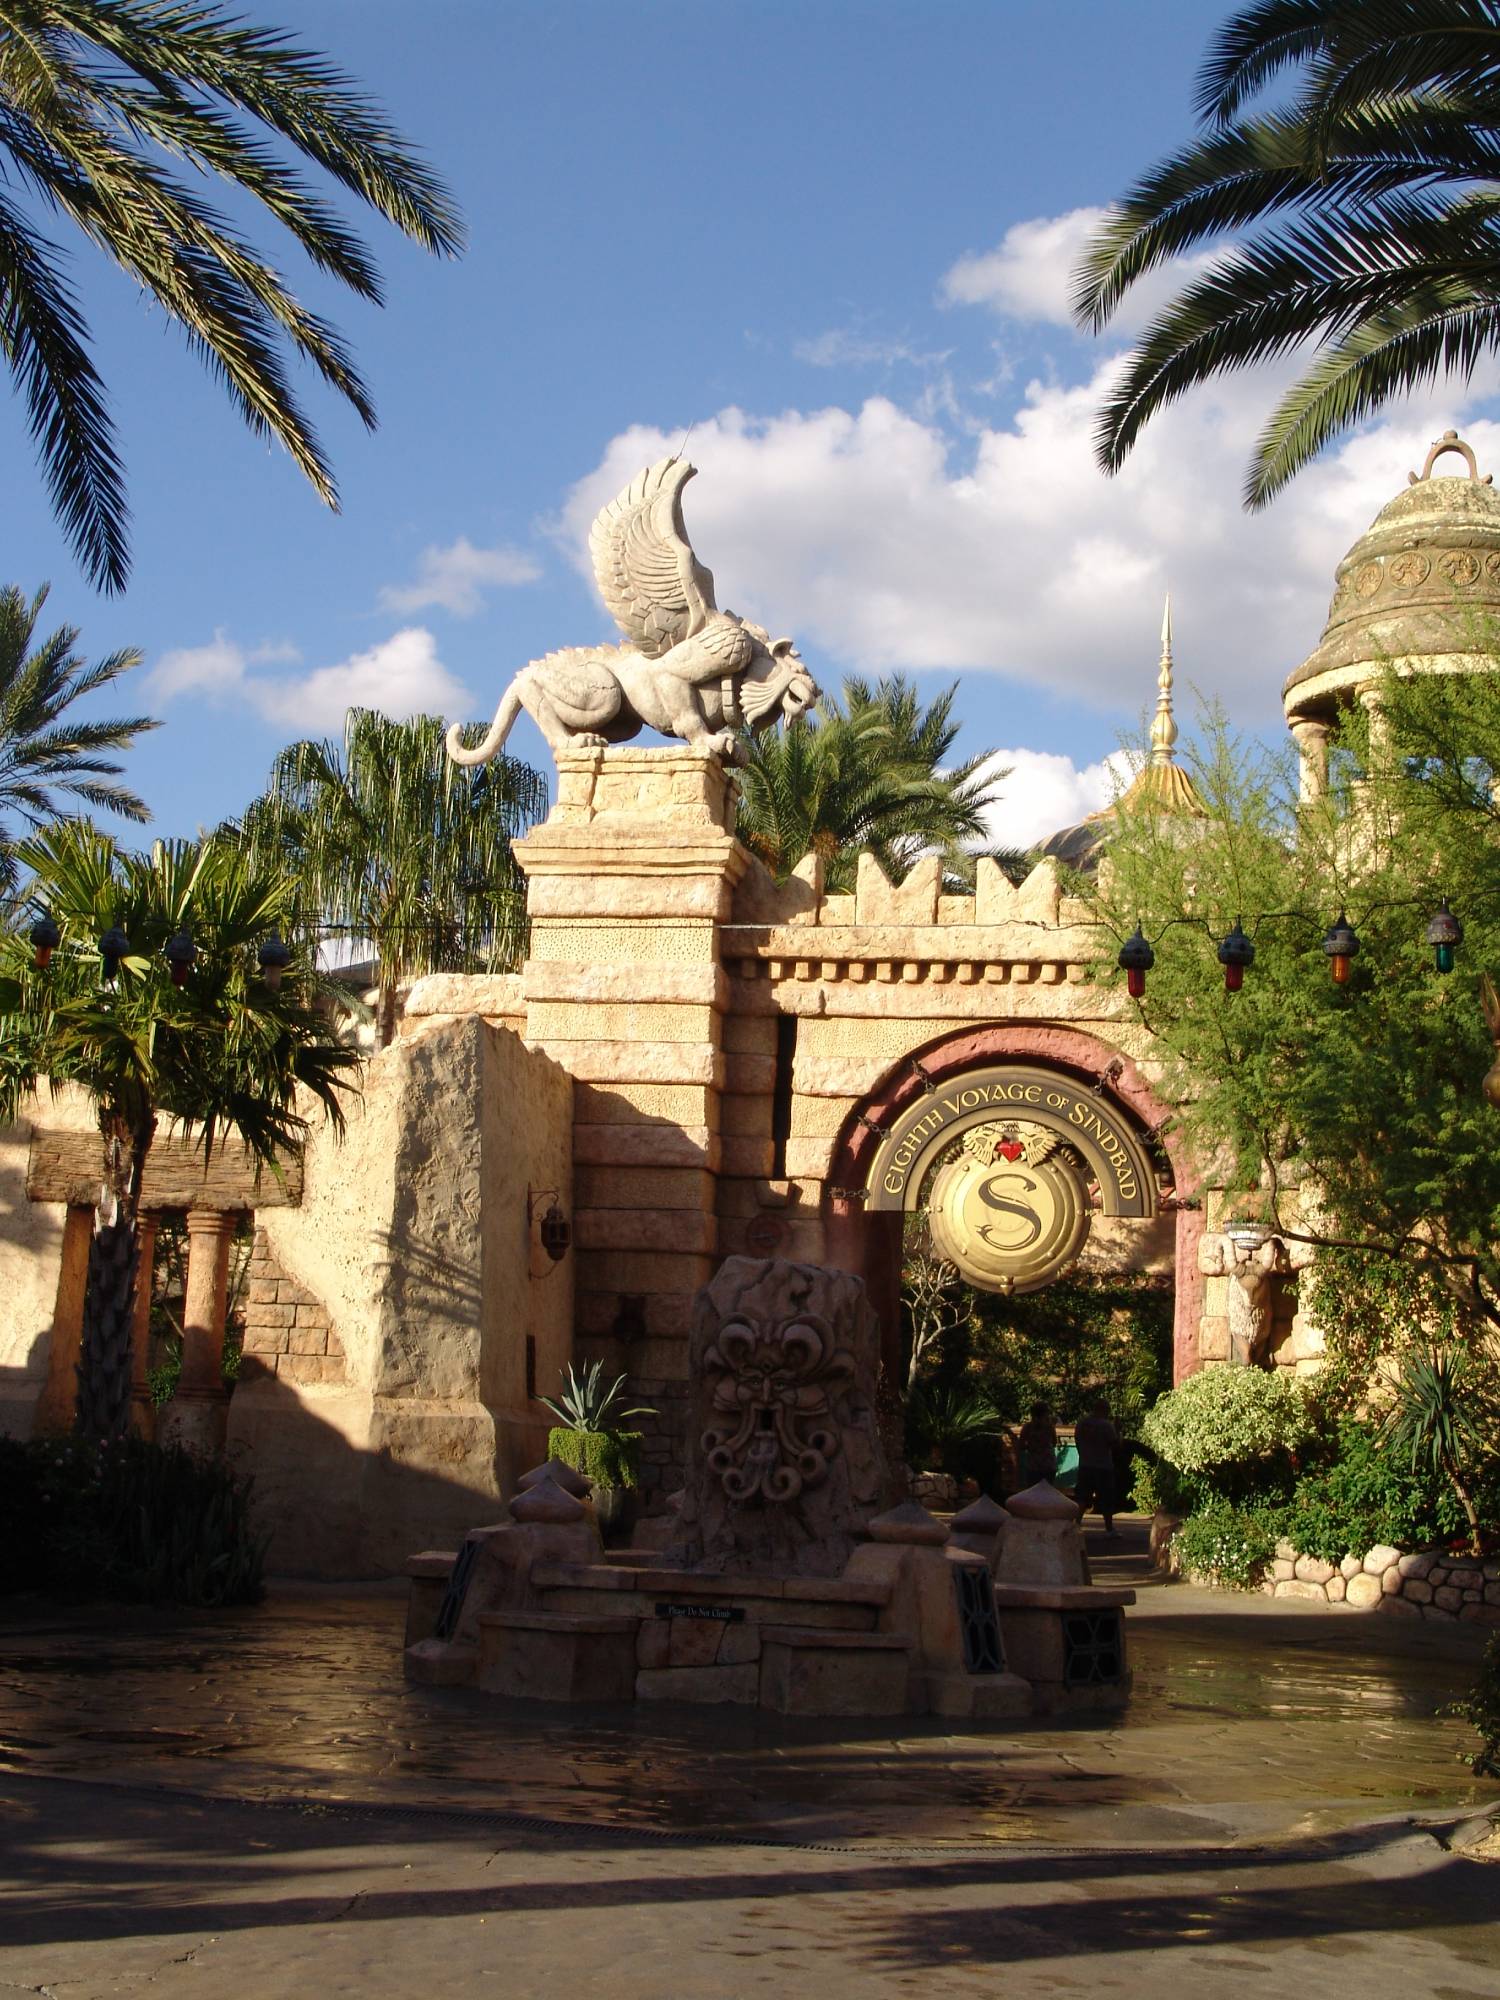 Islands of Adventure - The Lost Continent